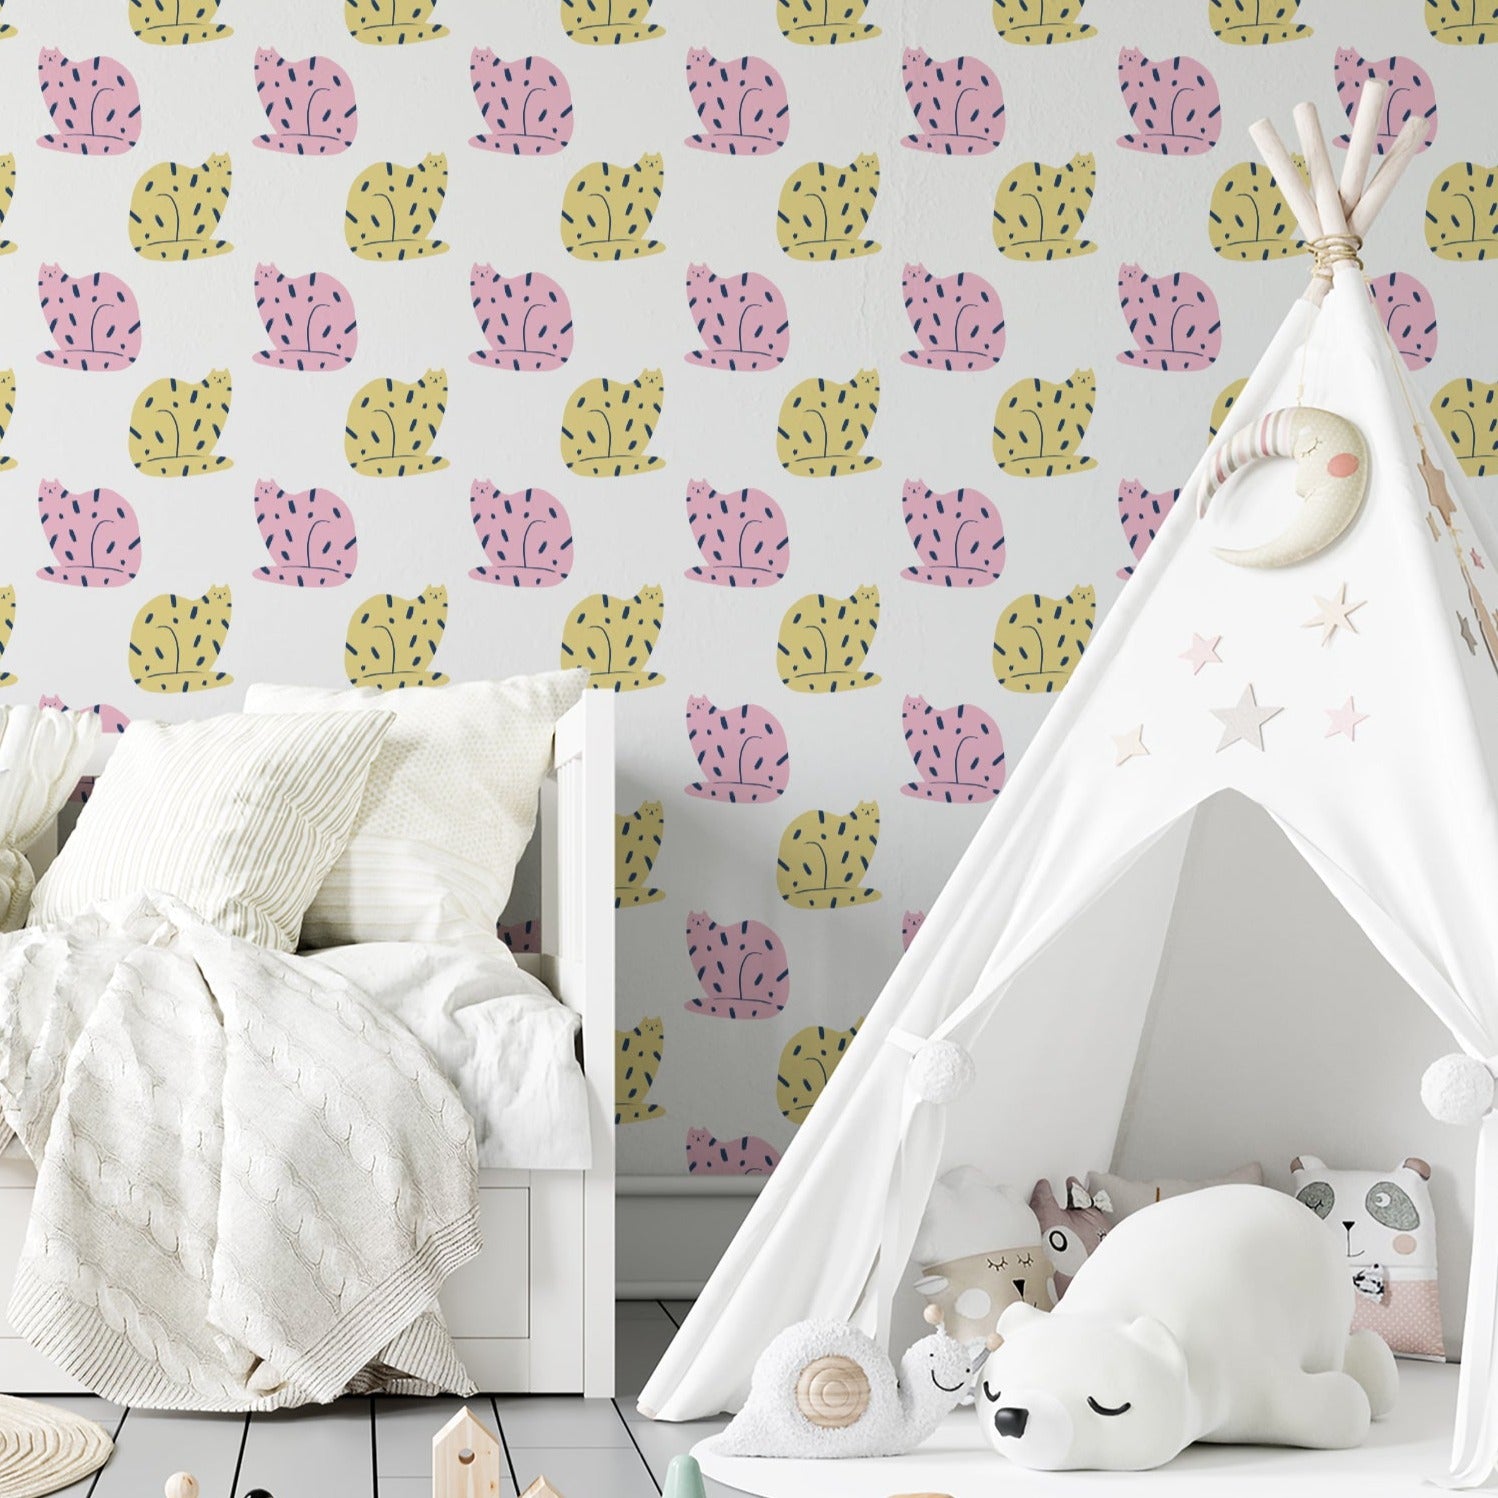 Room setup with a wall covered in cat-themed wallpaper displaying a sequence of pink and yellow cats with black accents. The room features a white teepee with star details and a plush polar bear, creating a cozy and imaginative children's play area